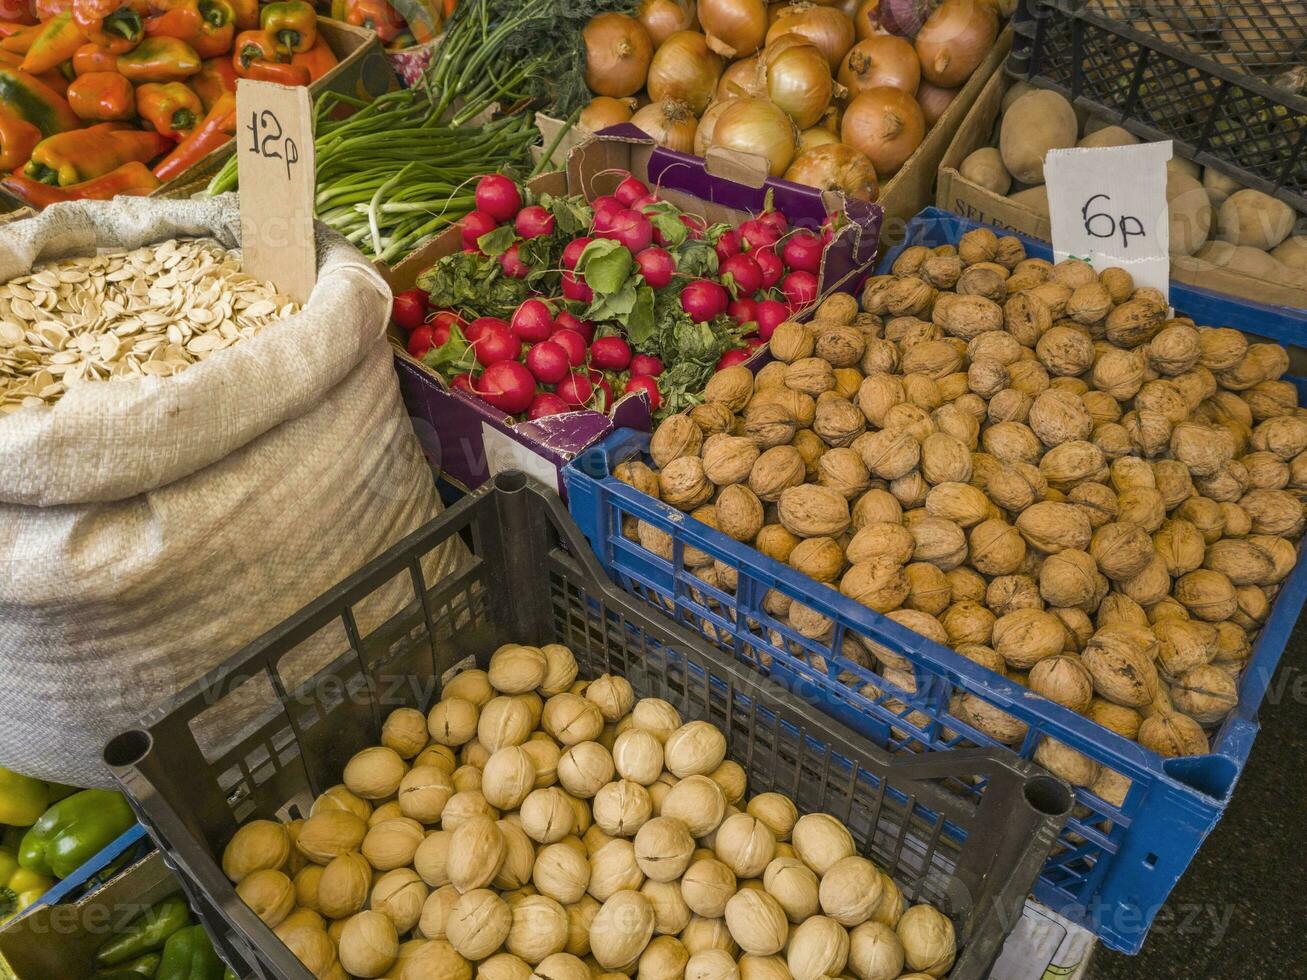 A variety of fresh fruits, seeds, nuts and vegetables on display at the market. Food photo